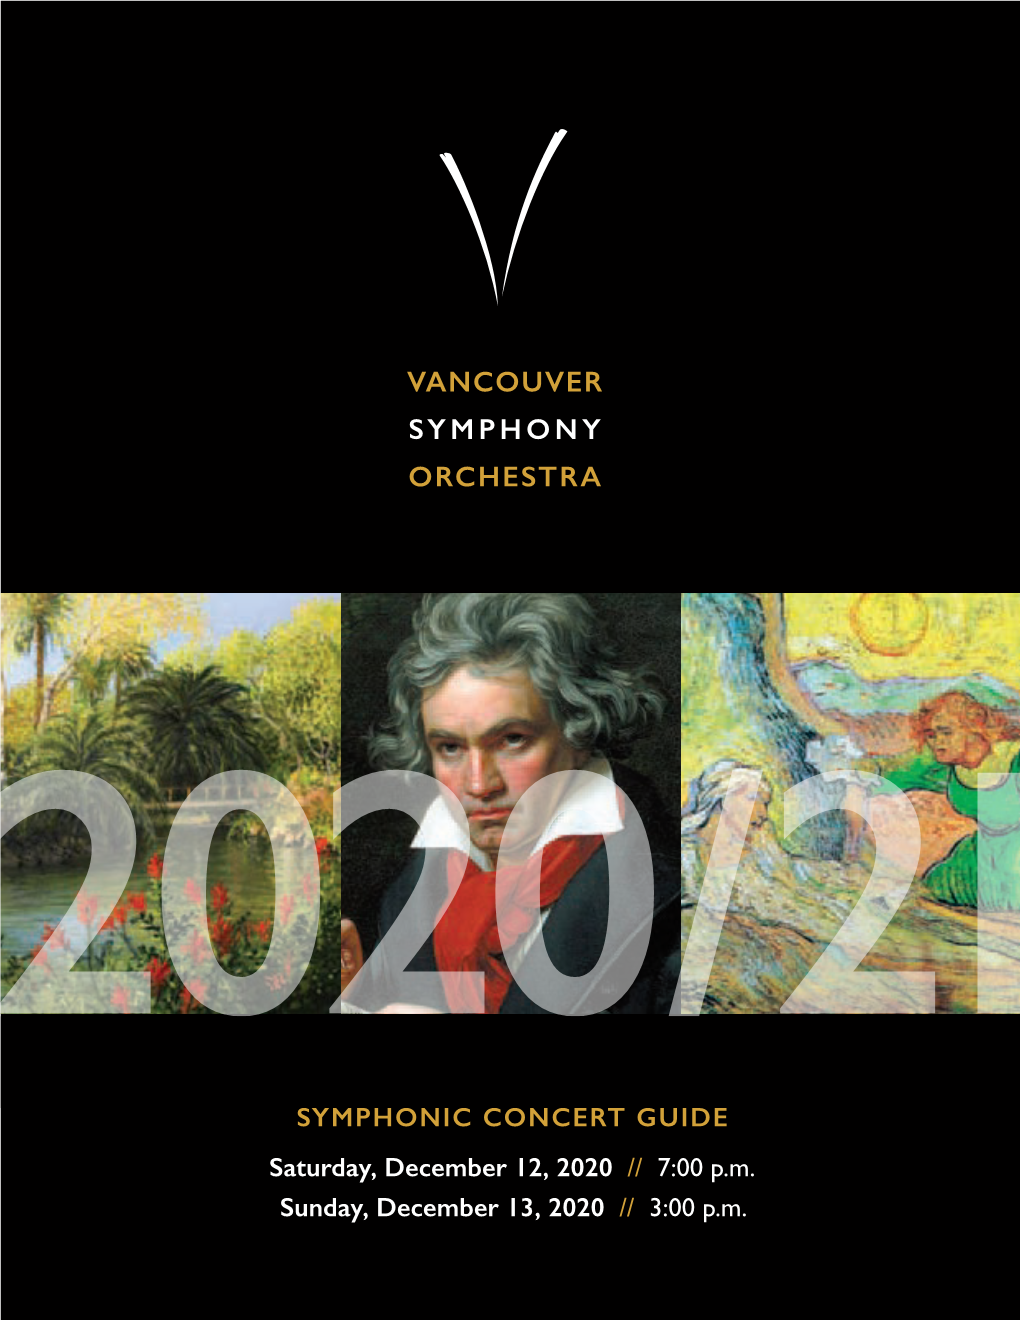 FRIENDS of the VSO Friends of the Vancouver Symphony 2020/21